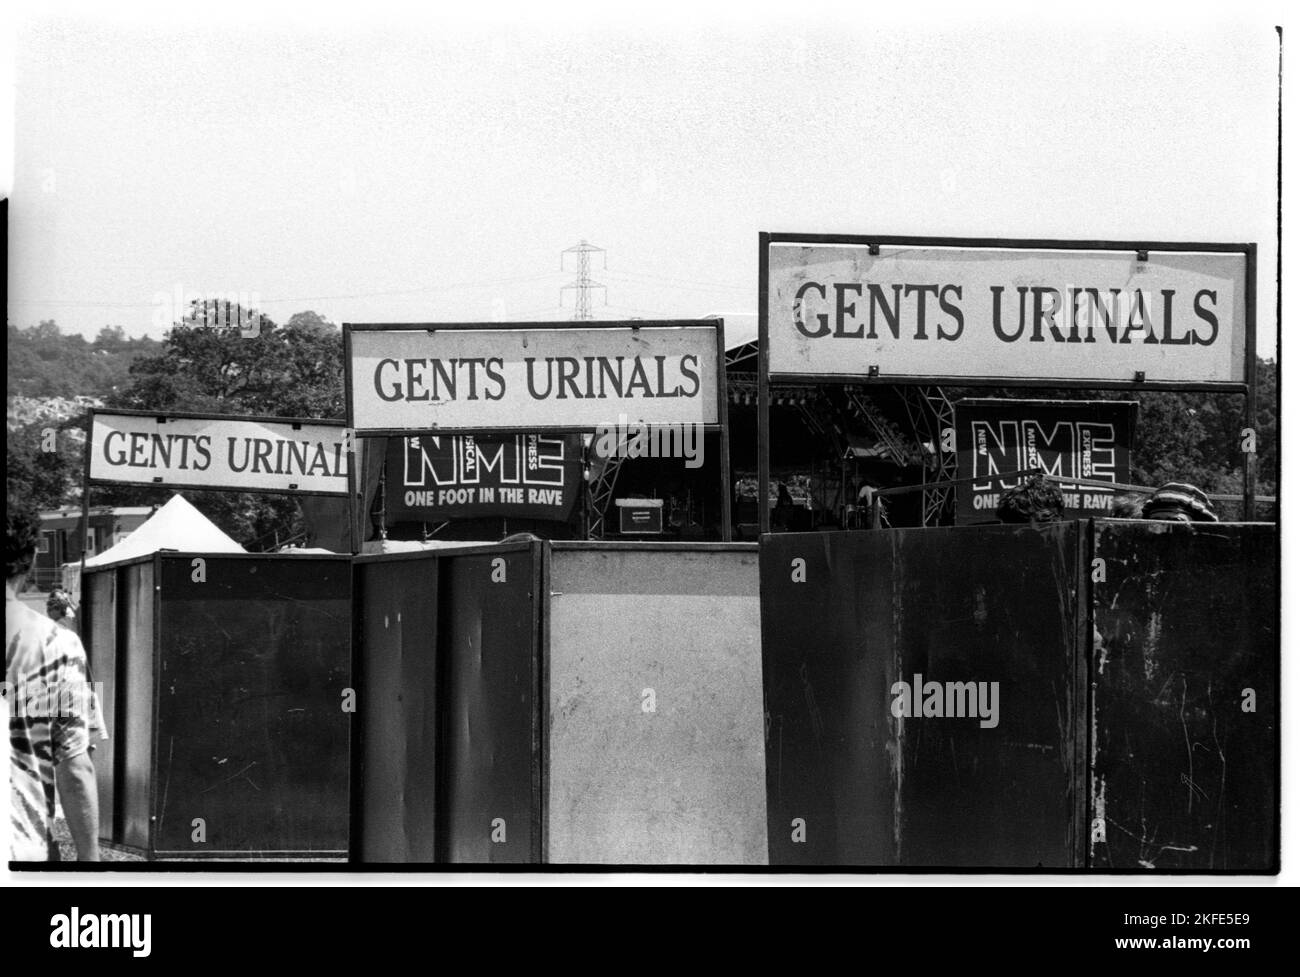 The infamous Gents urinals toilets at the NME Stage at Glastonbury Festival, Pilton, England, June 25-27 1993. Photograph: ROB WATKINS Stock Photo